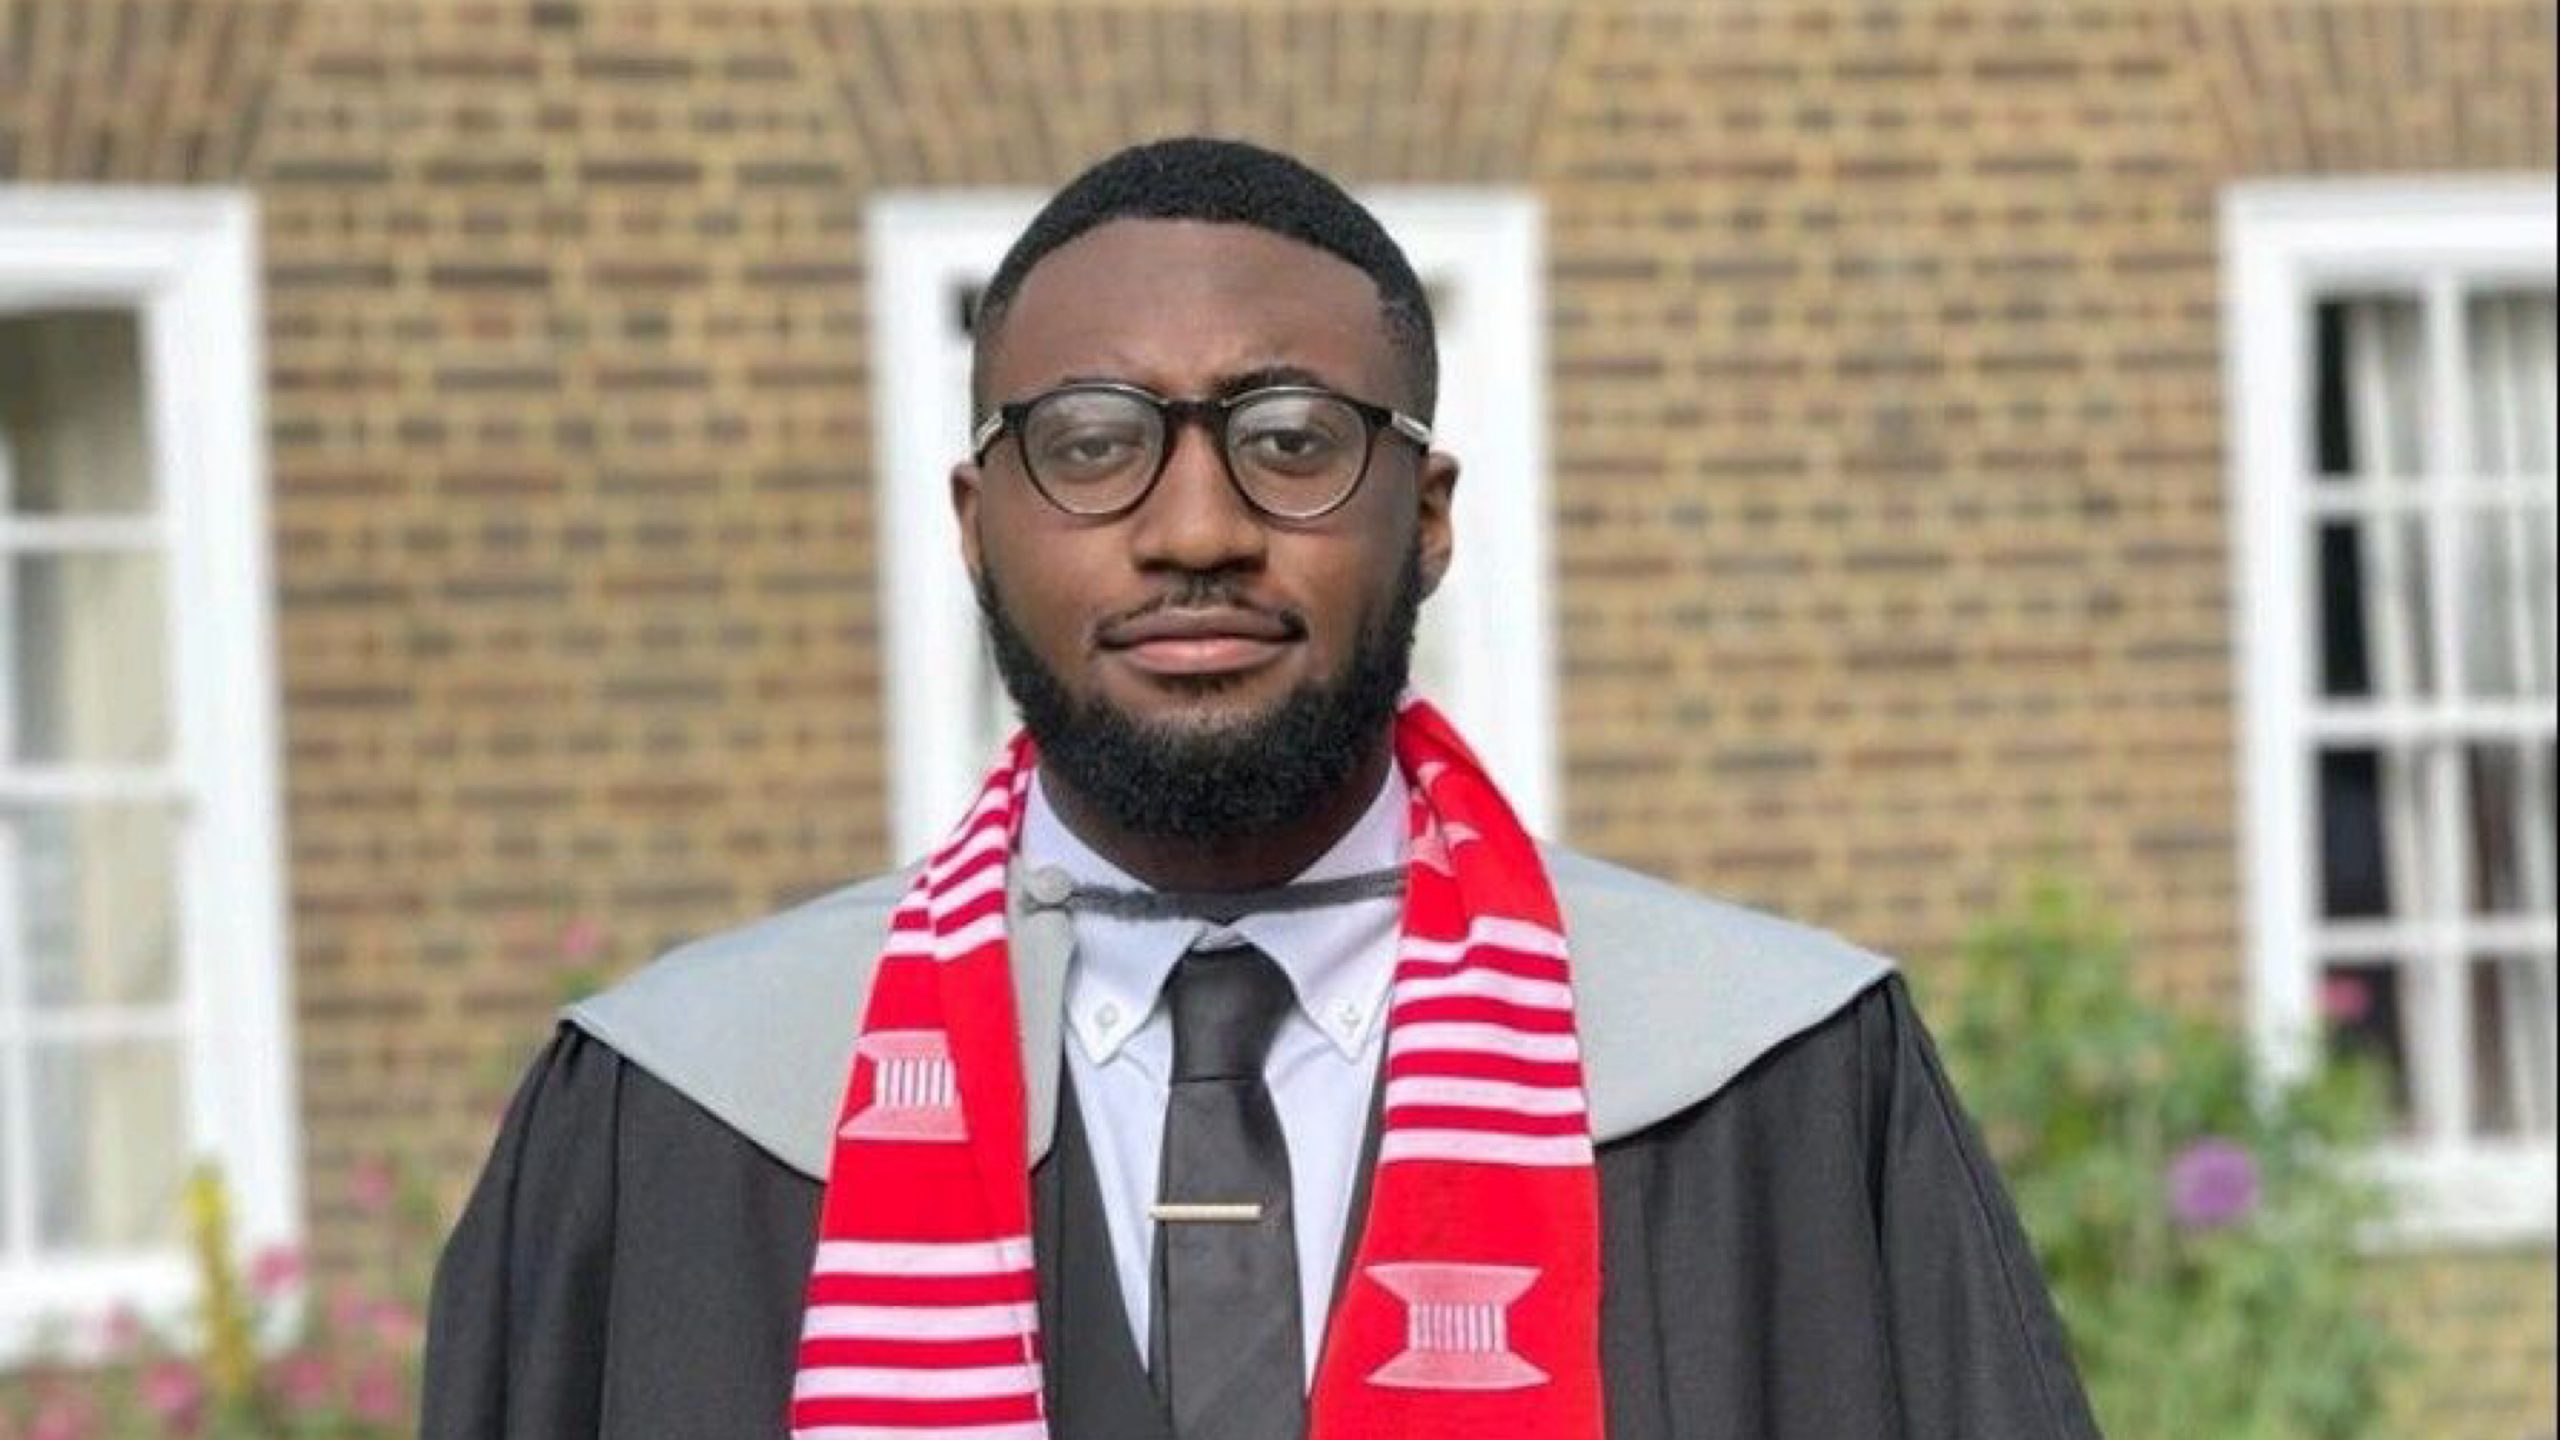 Caleb Jimoh, Son of Angela Kyerematen-Jimoh Graduates With LLB, Working Towards A Masters in Tech Law